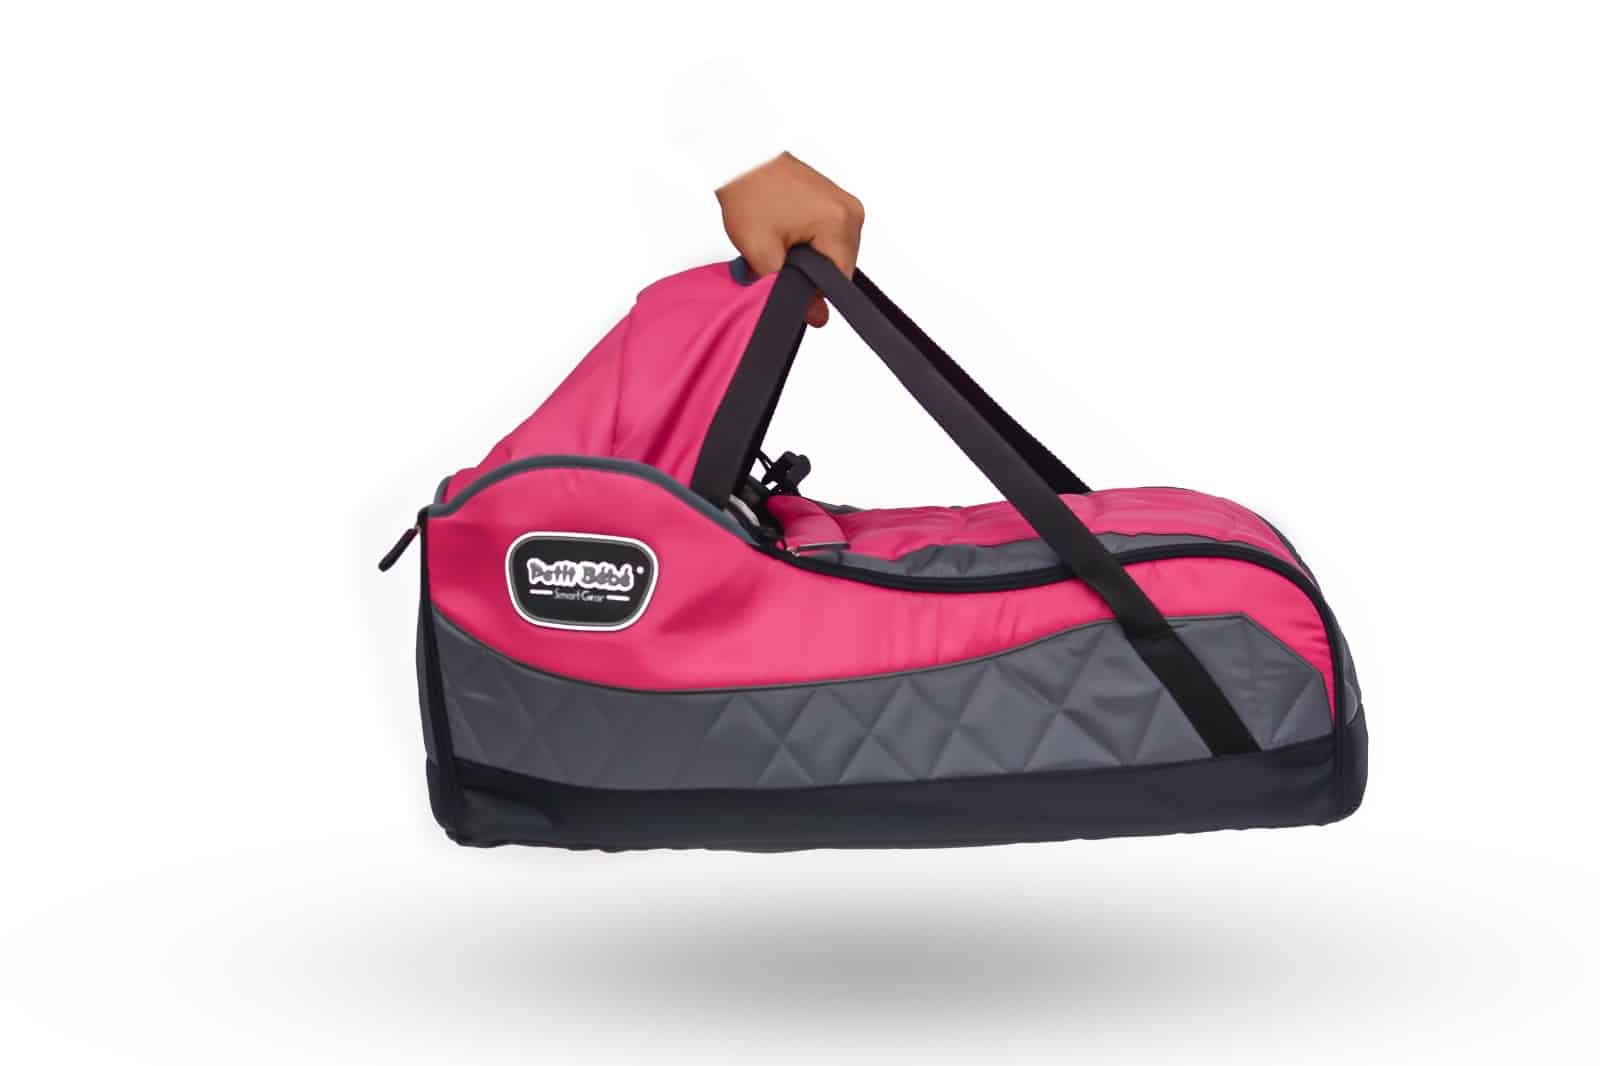 Carry Cot Smart S1